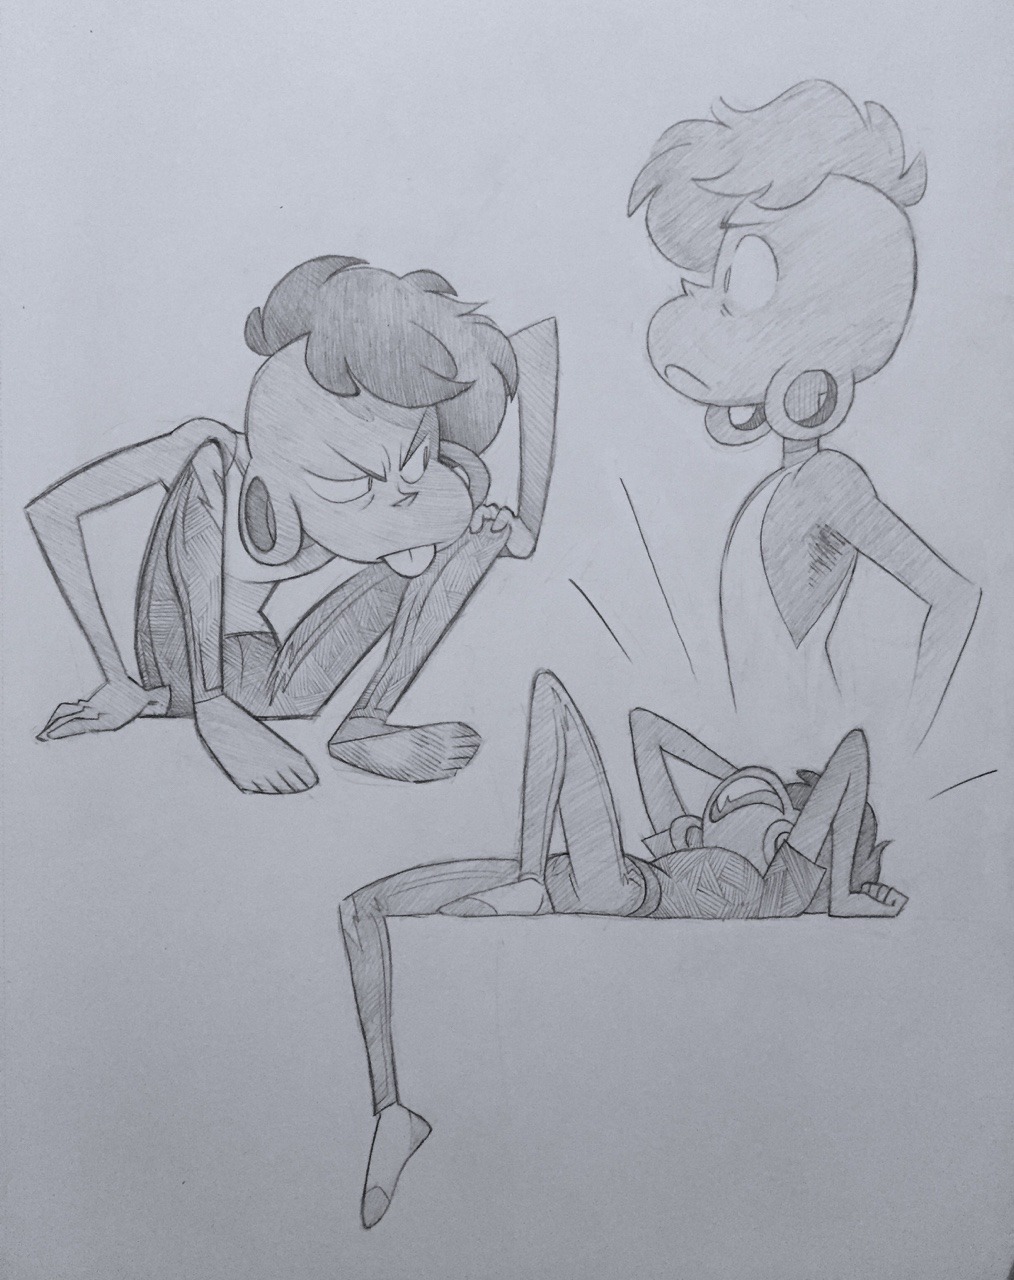 “limbs everywhere” + “annoyed” = good lars content imo